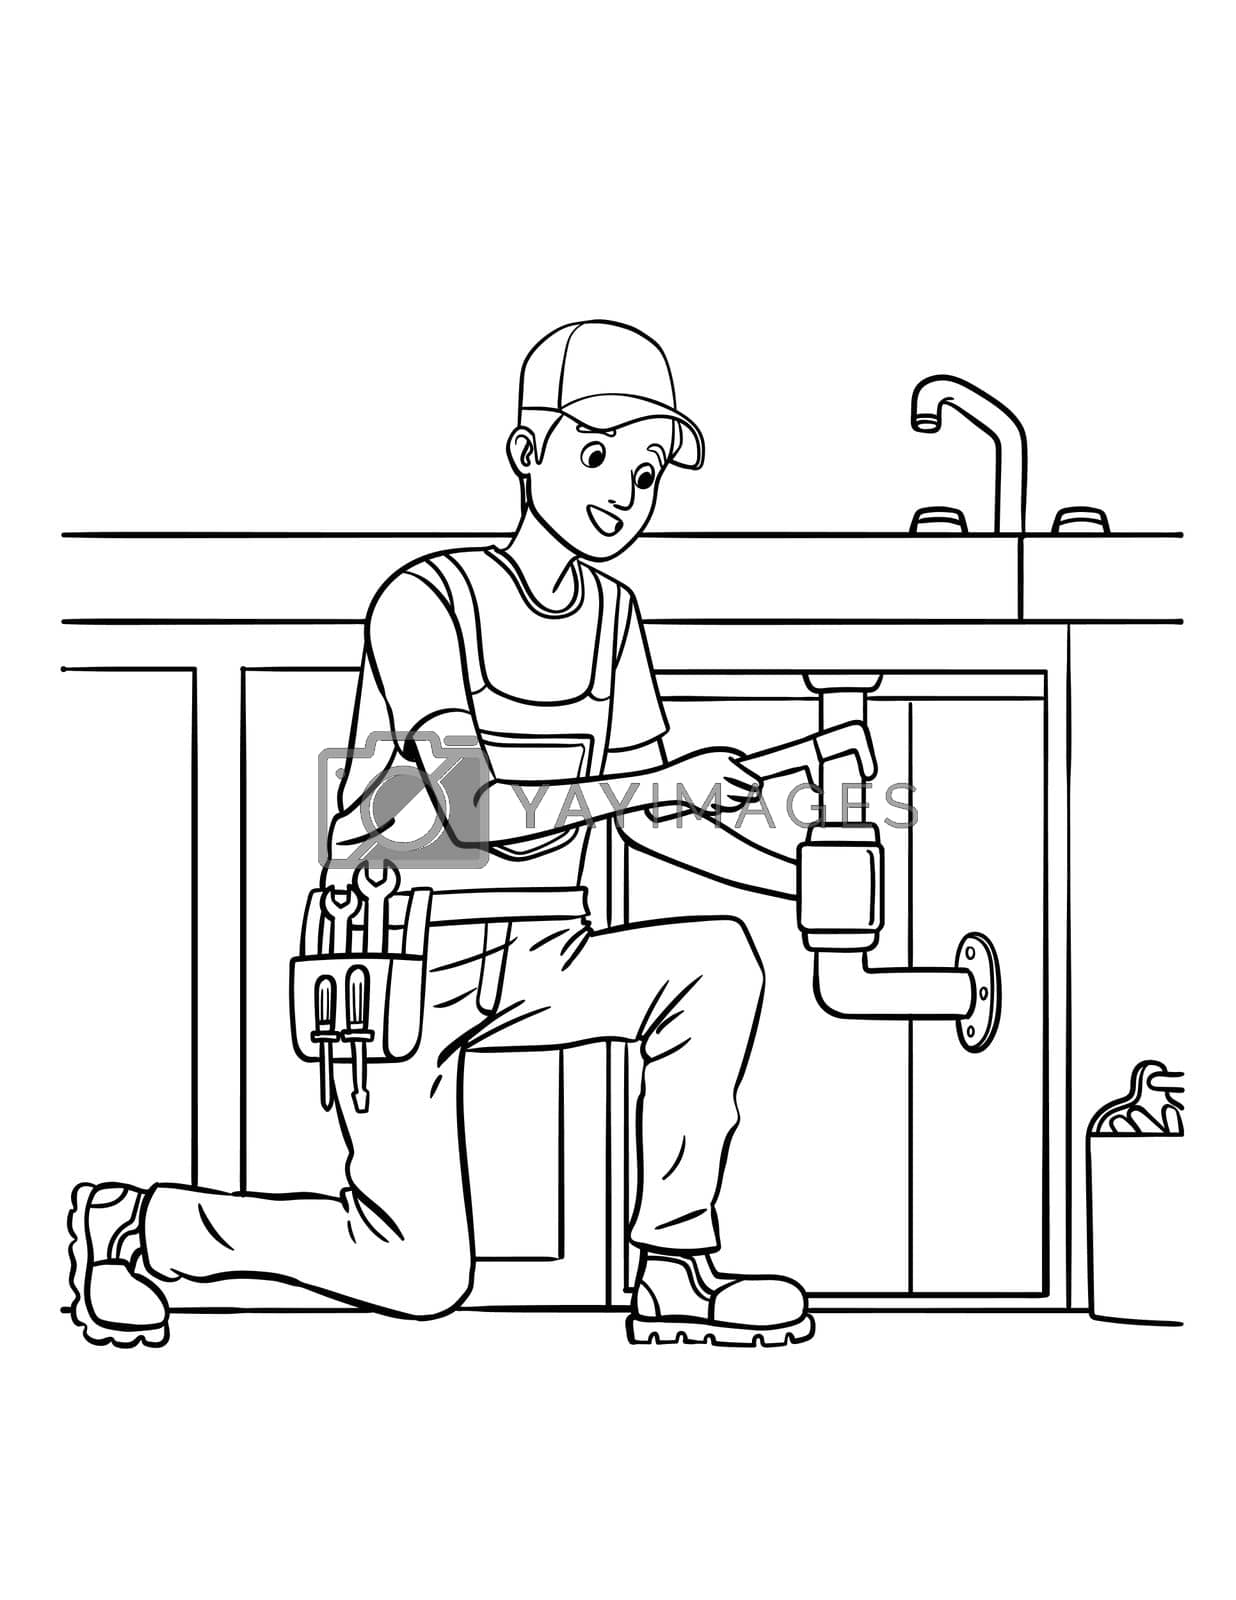 Royalty free image of Plumber Isolated Coloring Page for Kids by abbydesign